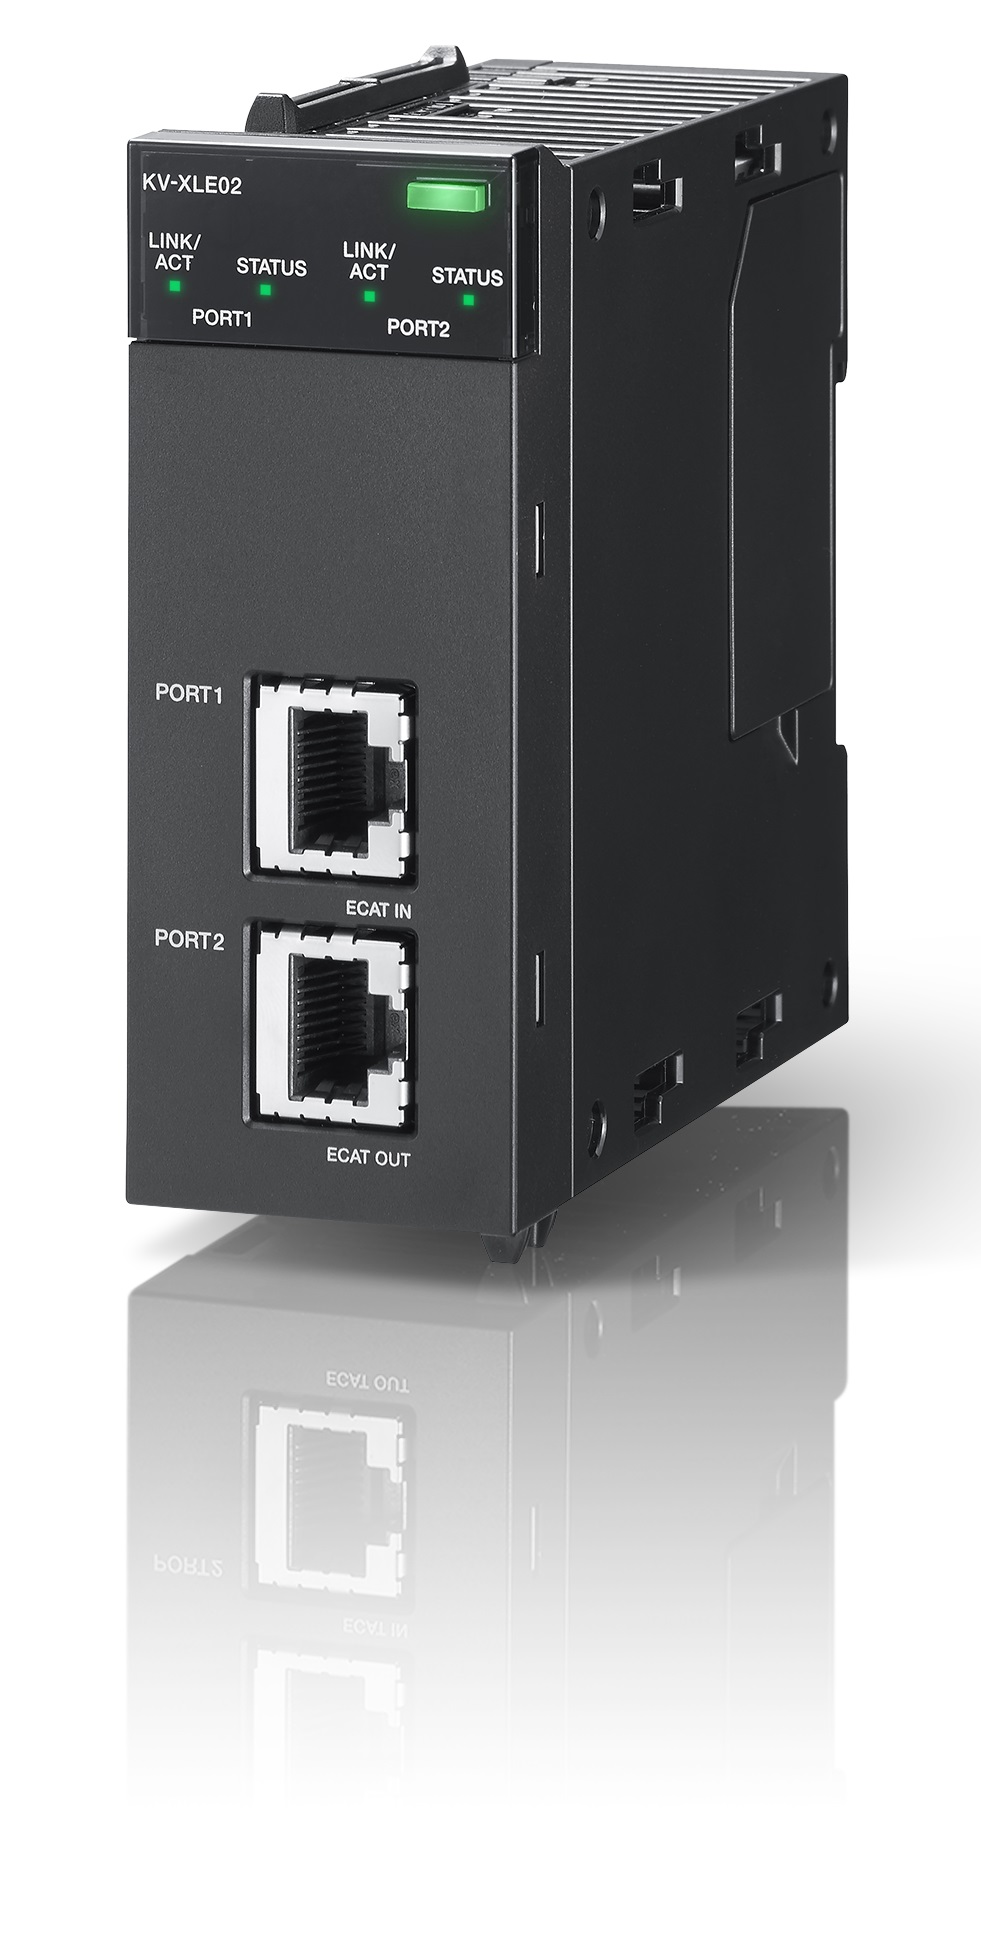 Ethernet unit KV-XLE02 for KV-7000 series | Search by specifying